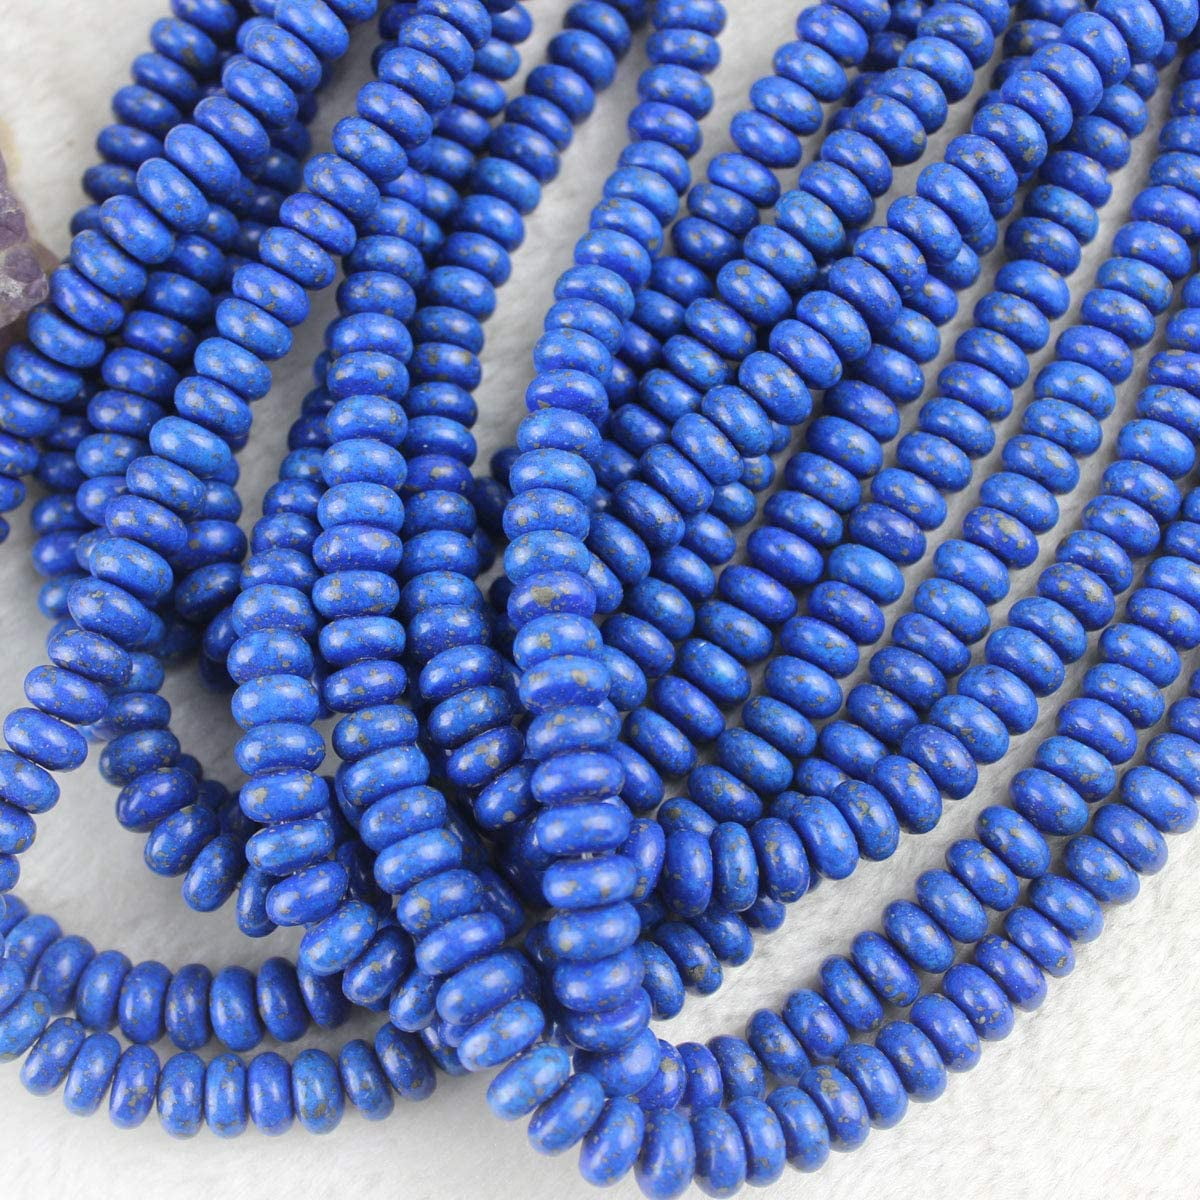 8mm 10mm 12mm 14mm Blue Lapis Lazuli Gemstone Oval Beads For Jewelry Making 15" 